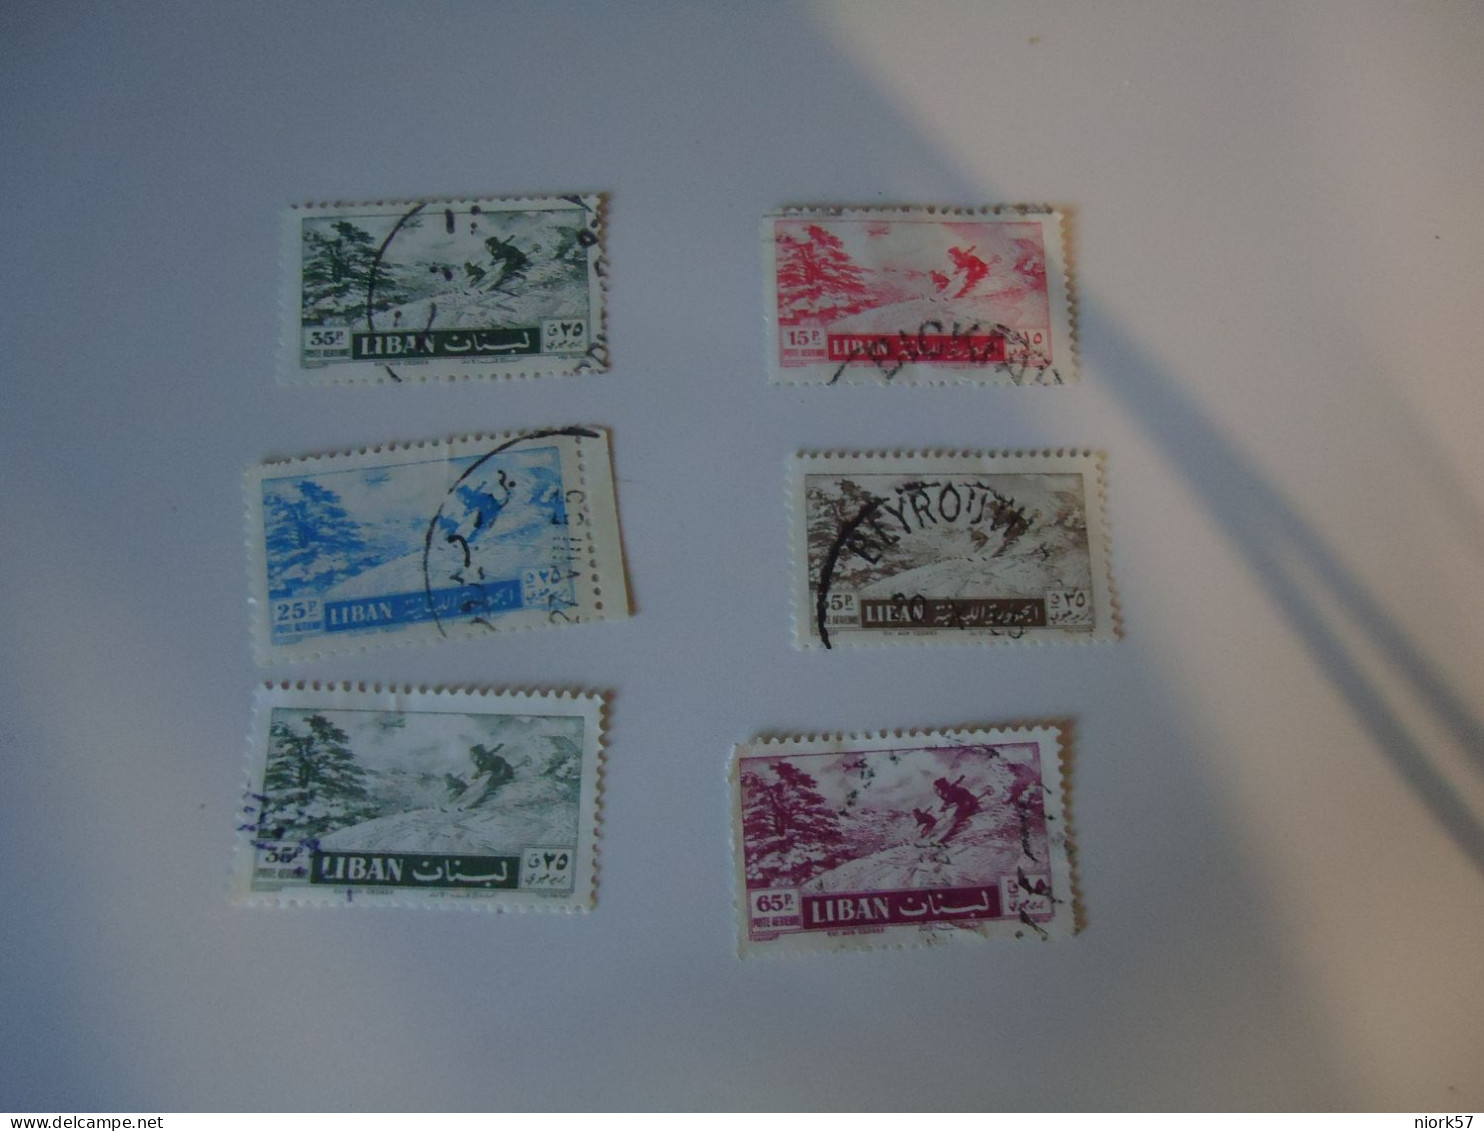 LIBAN  LEBANON USED    6  STAMPS  LANDSCAPES SKIERS - Lebanon